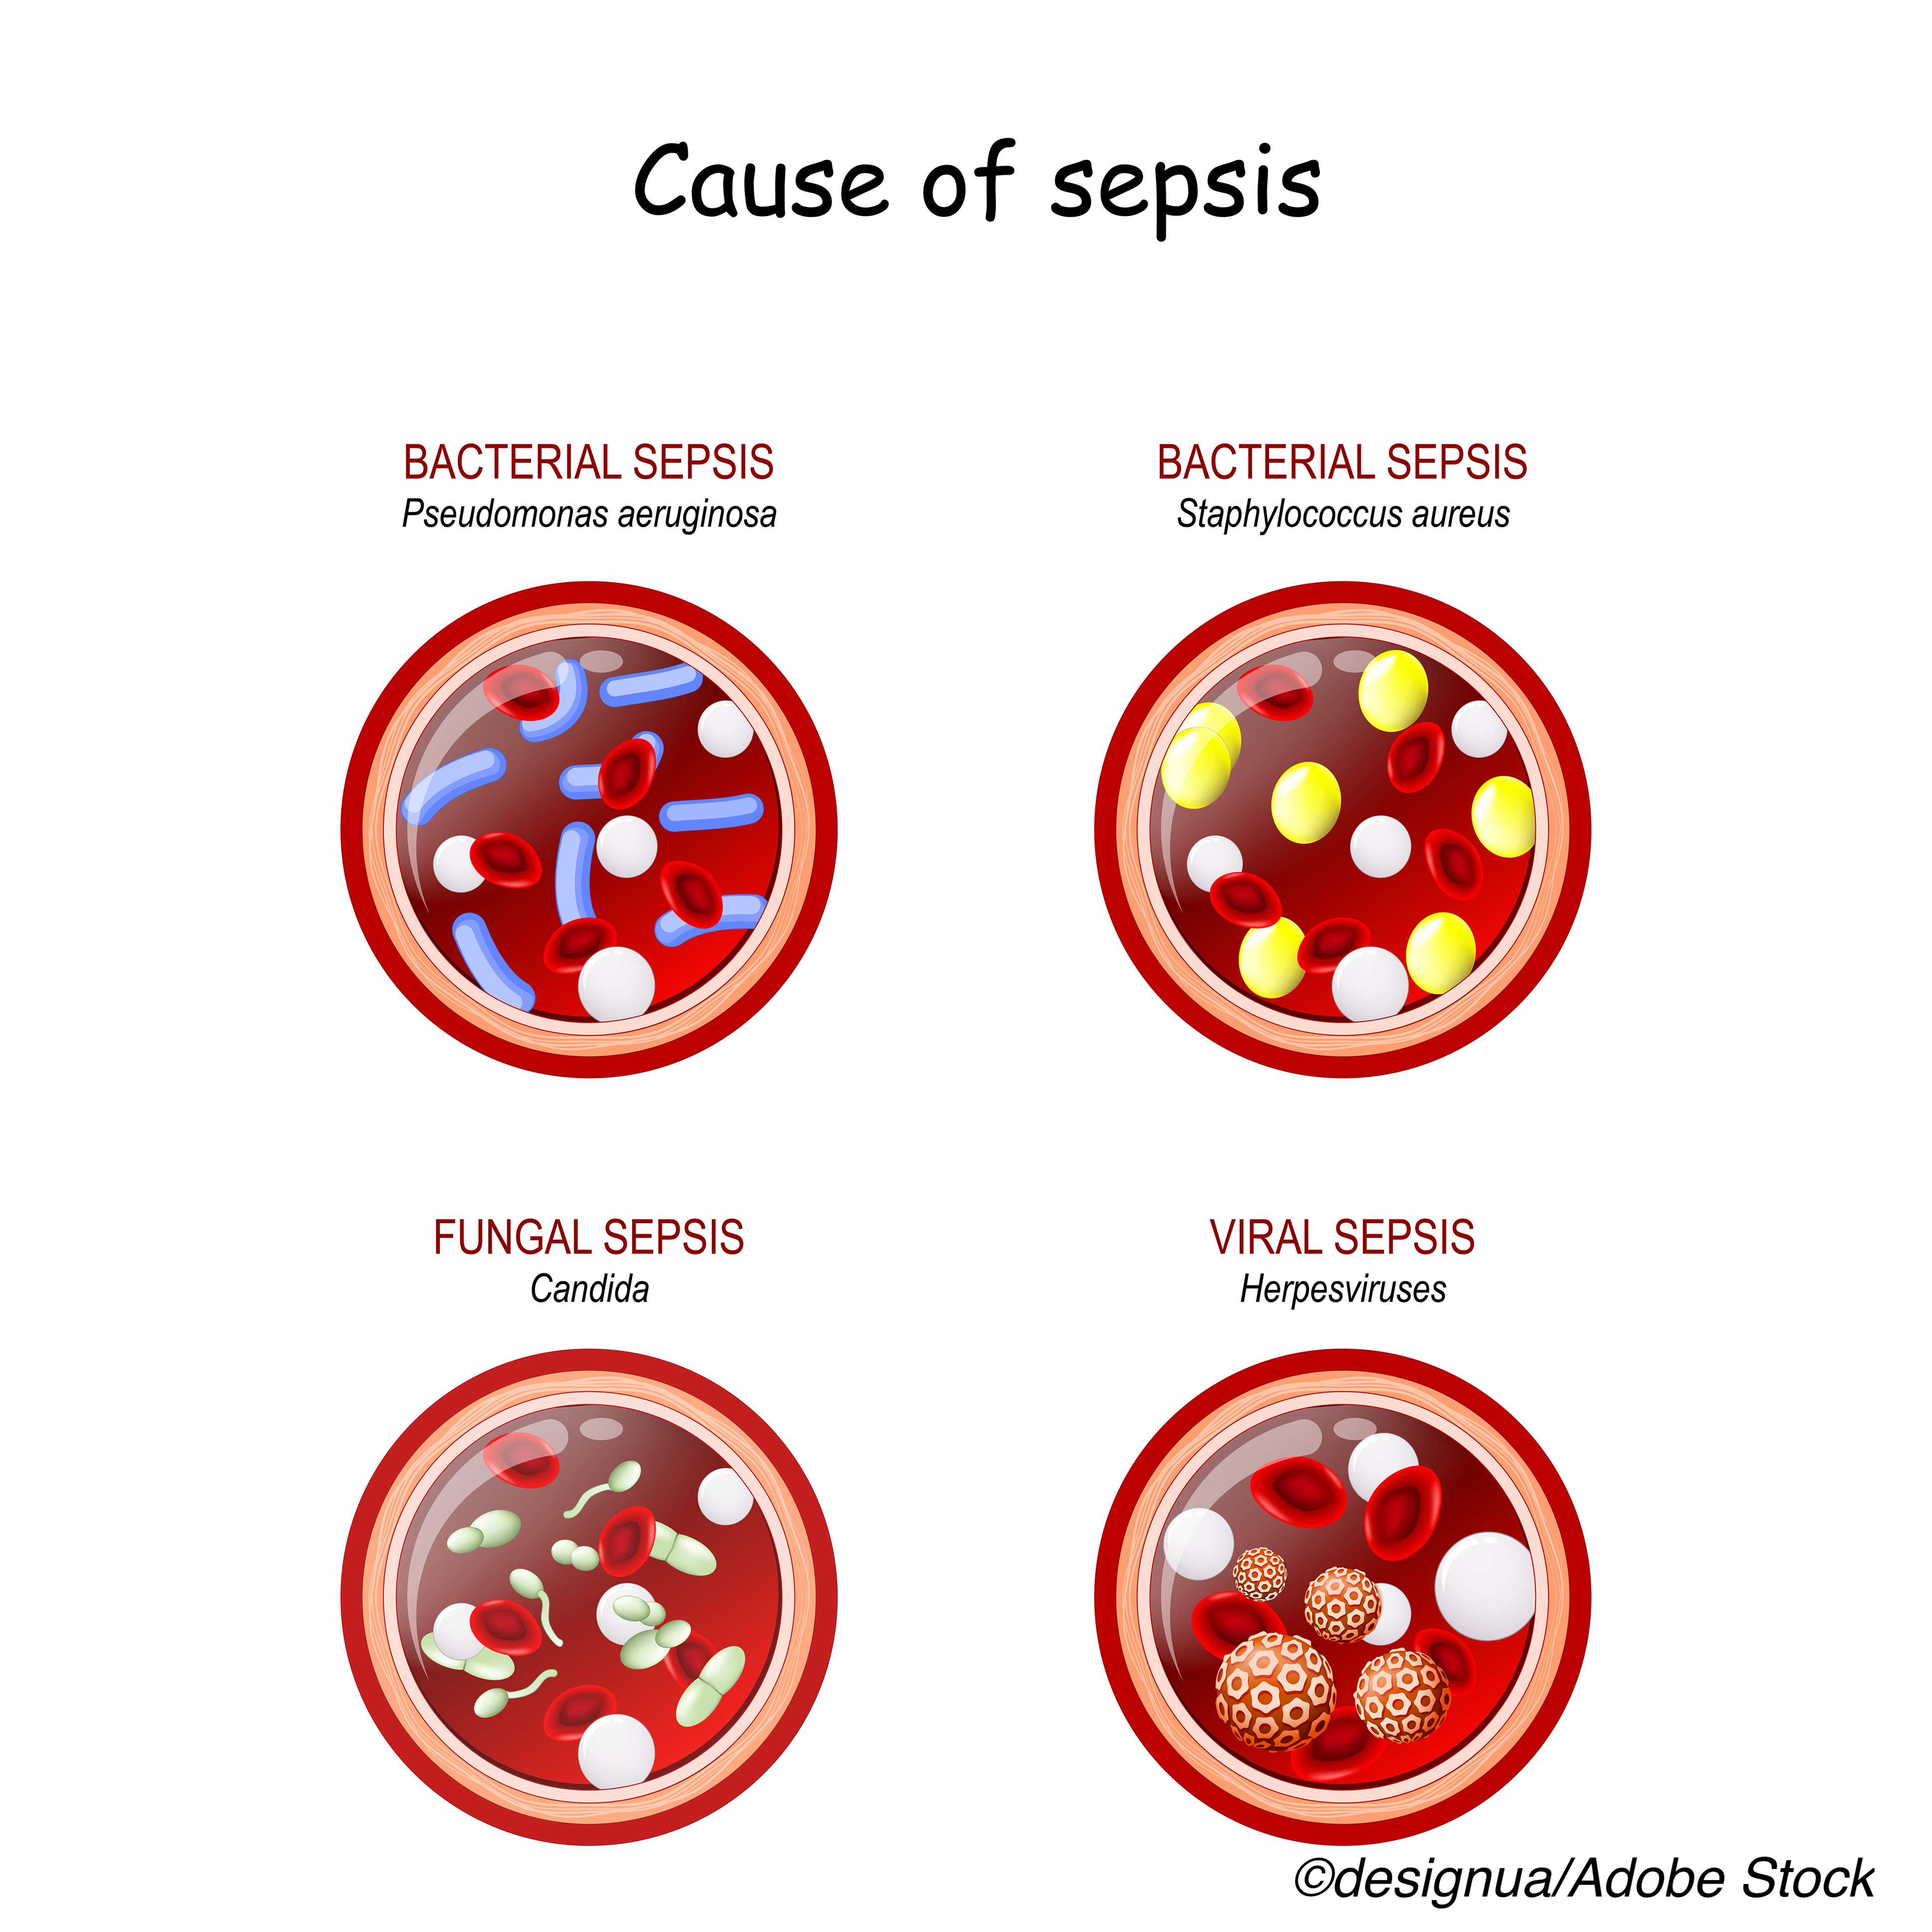 SEP-1 Failed to Reduce Sepsis Mortality in Real-World Study